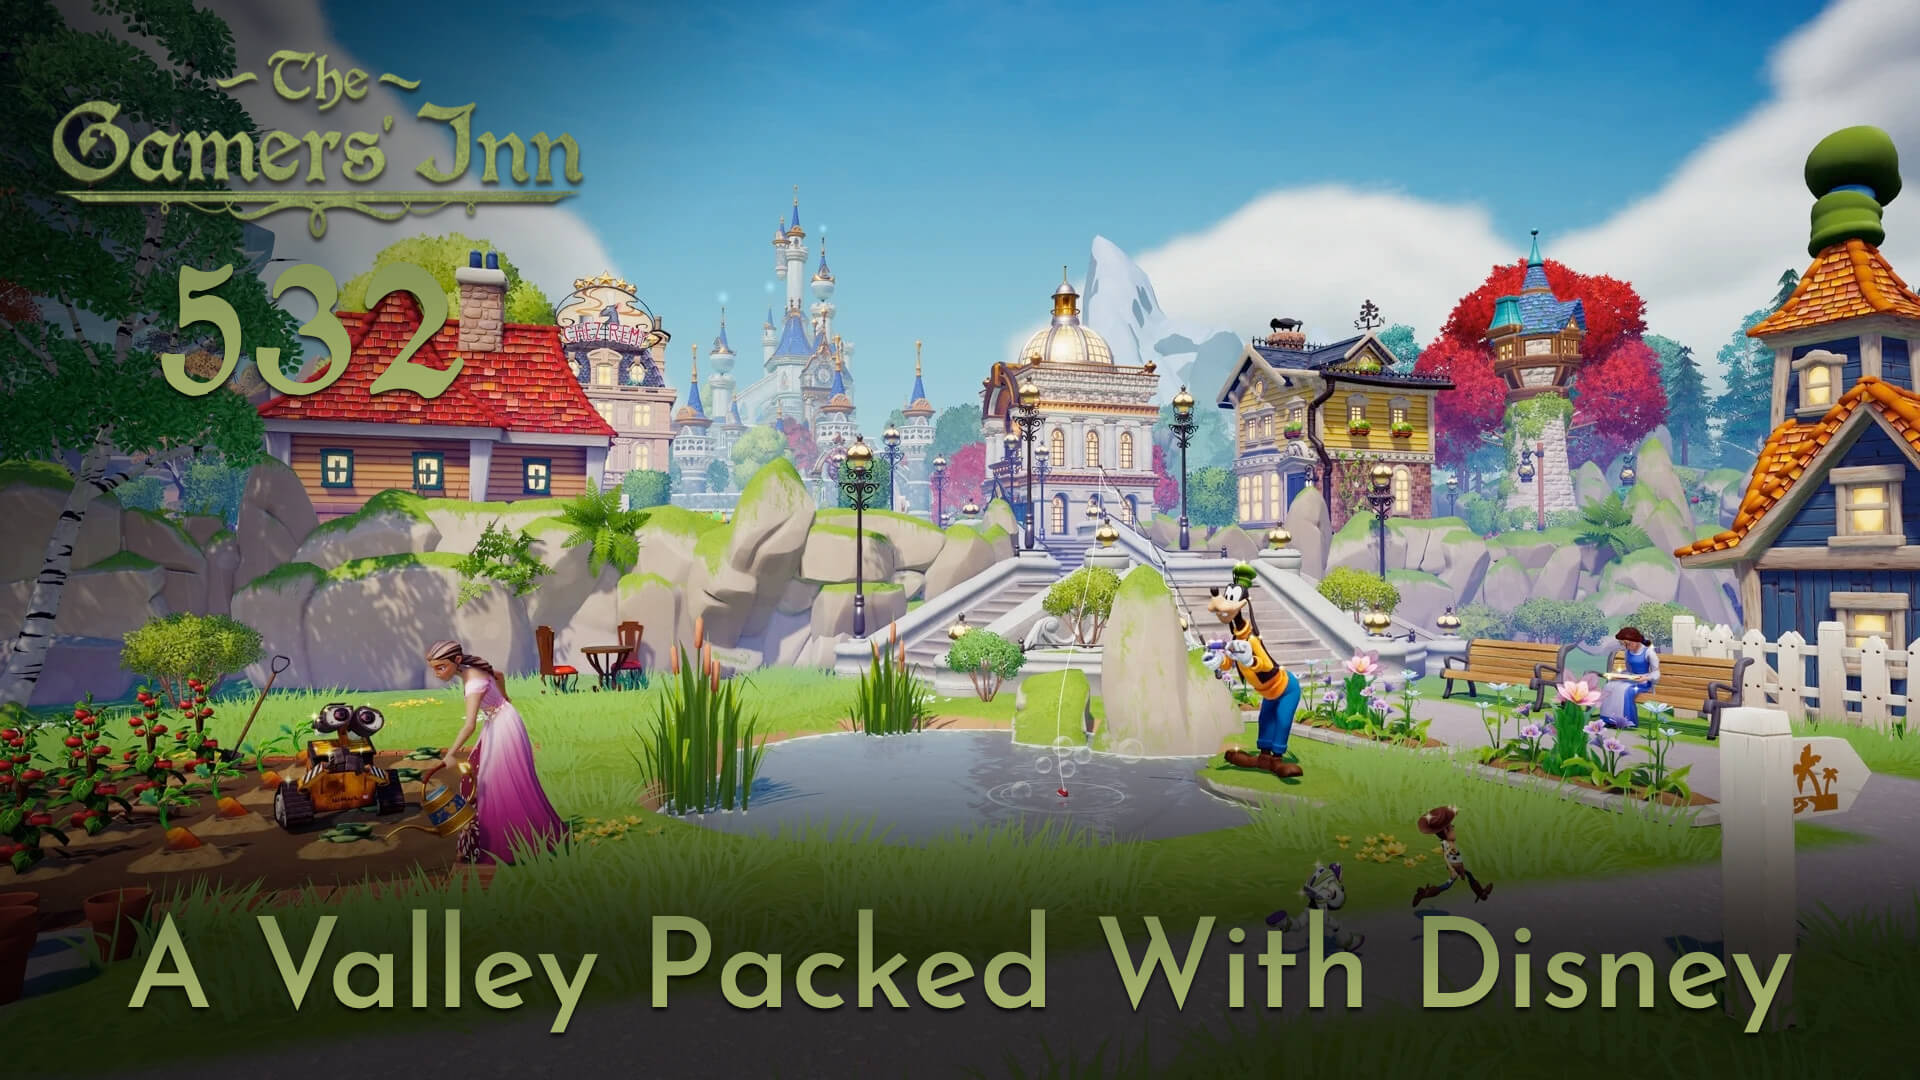 TGI 532 – A Valley Packed With Disney